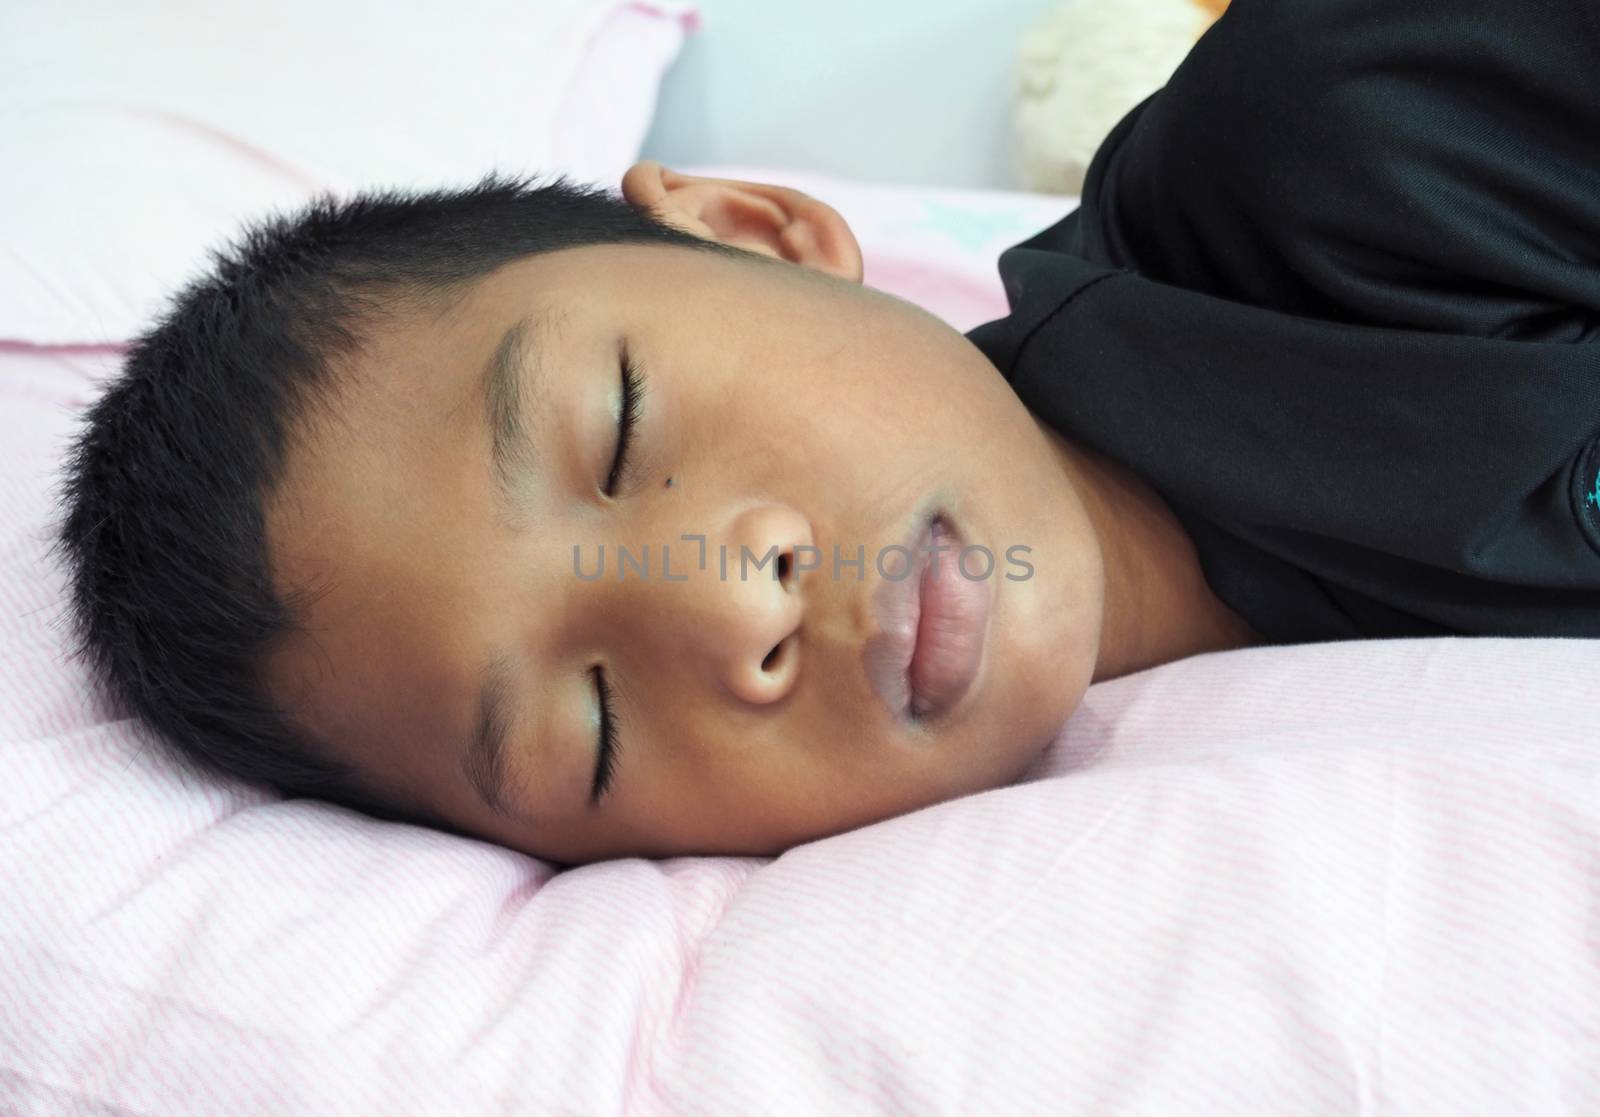 A close up of a boy sleeping on the bed by Unimages2527